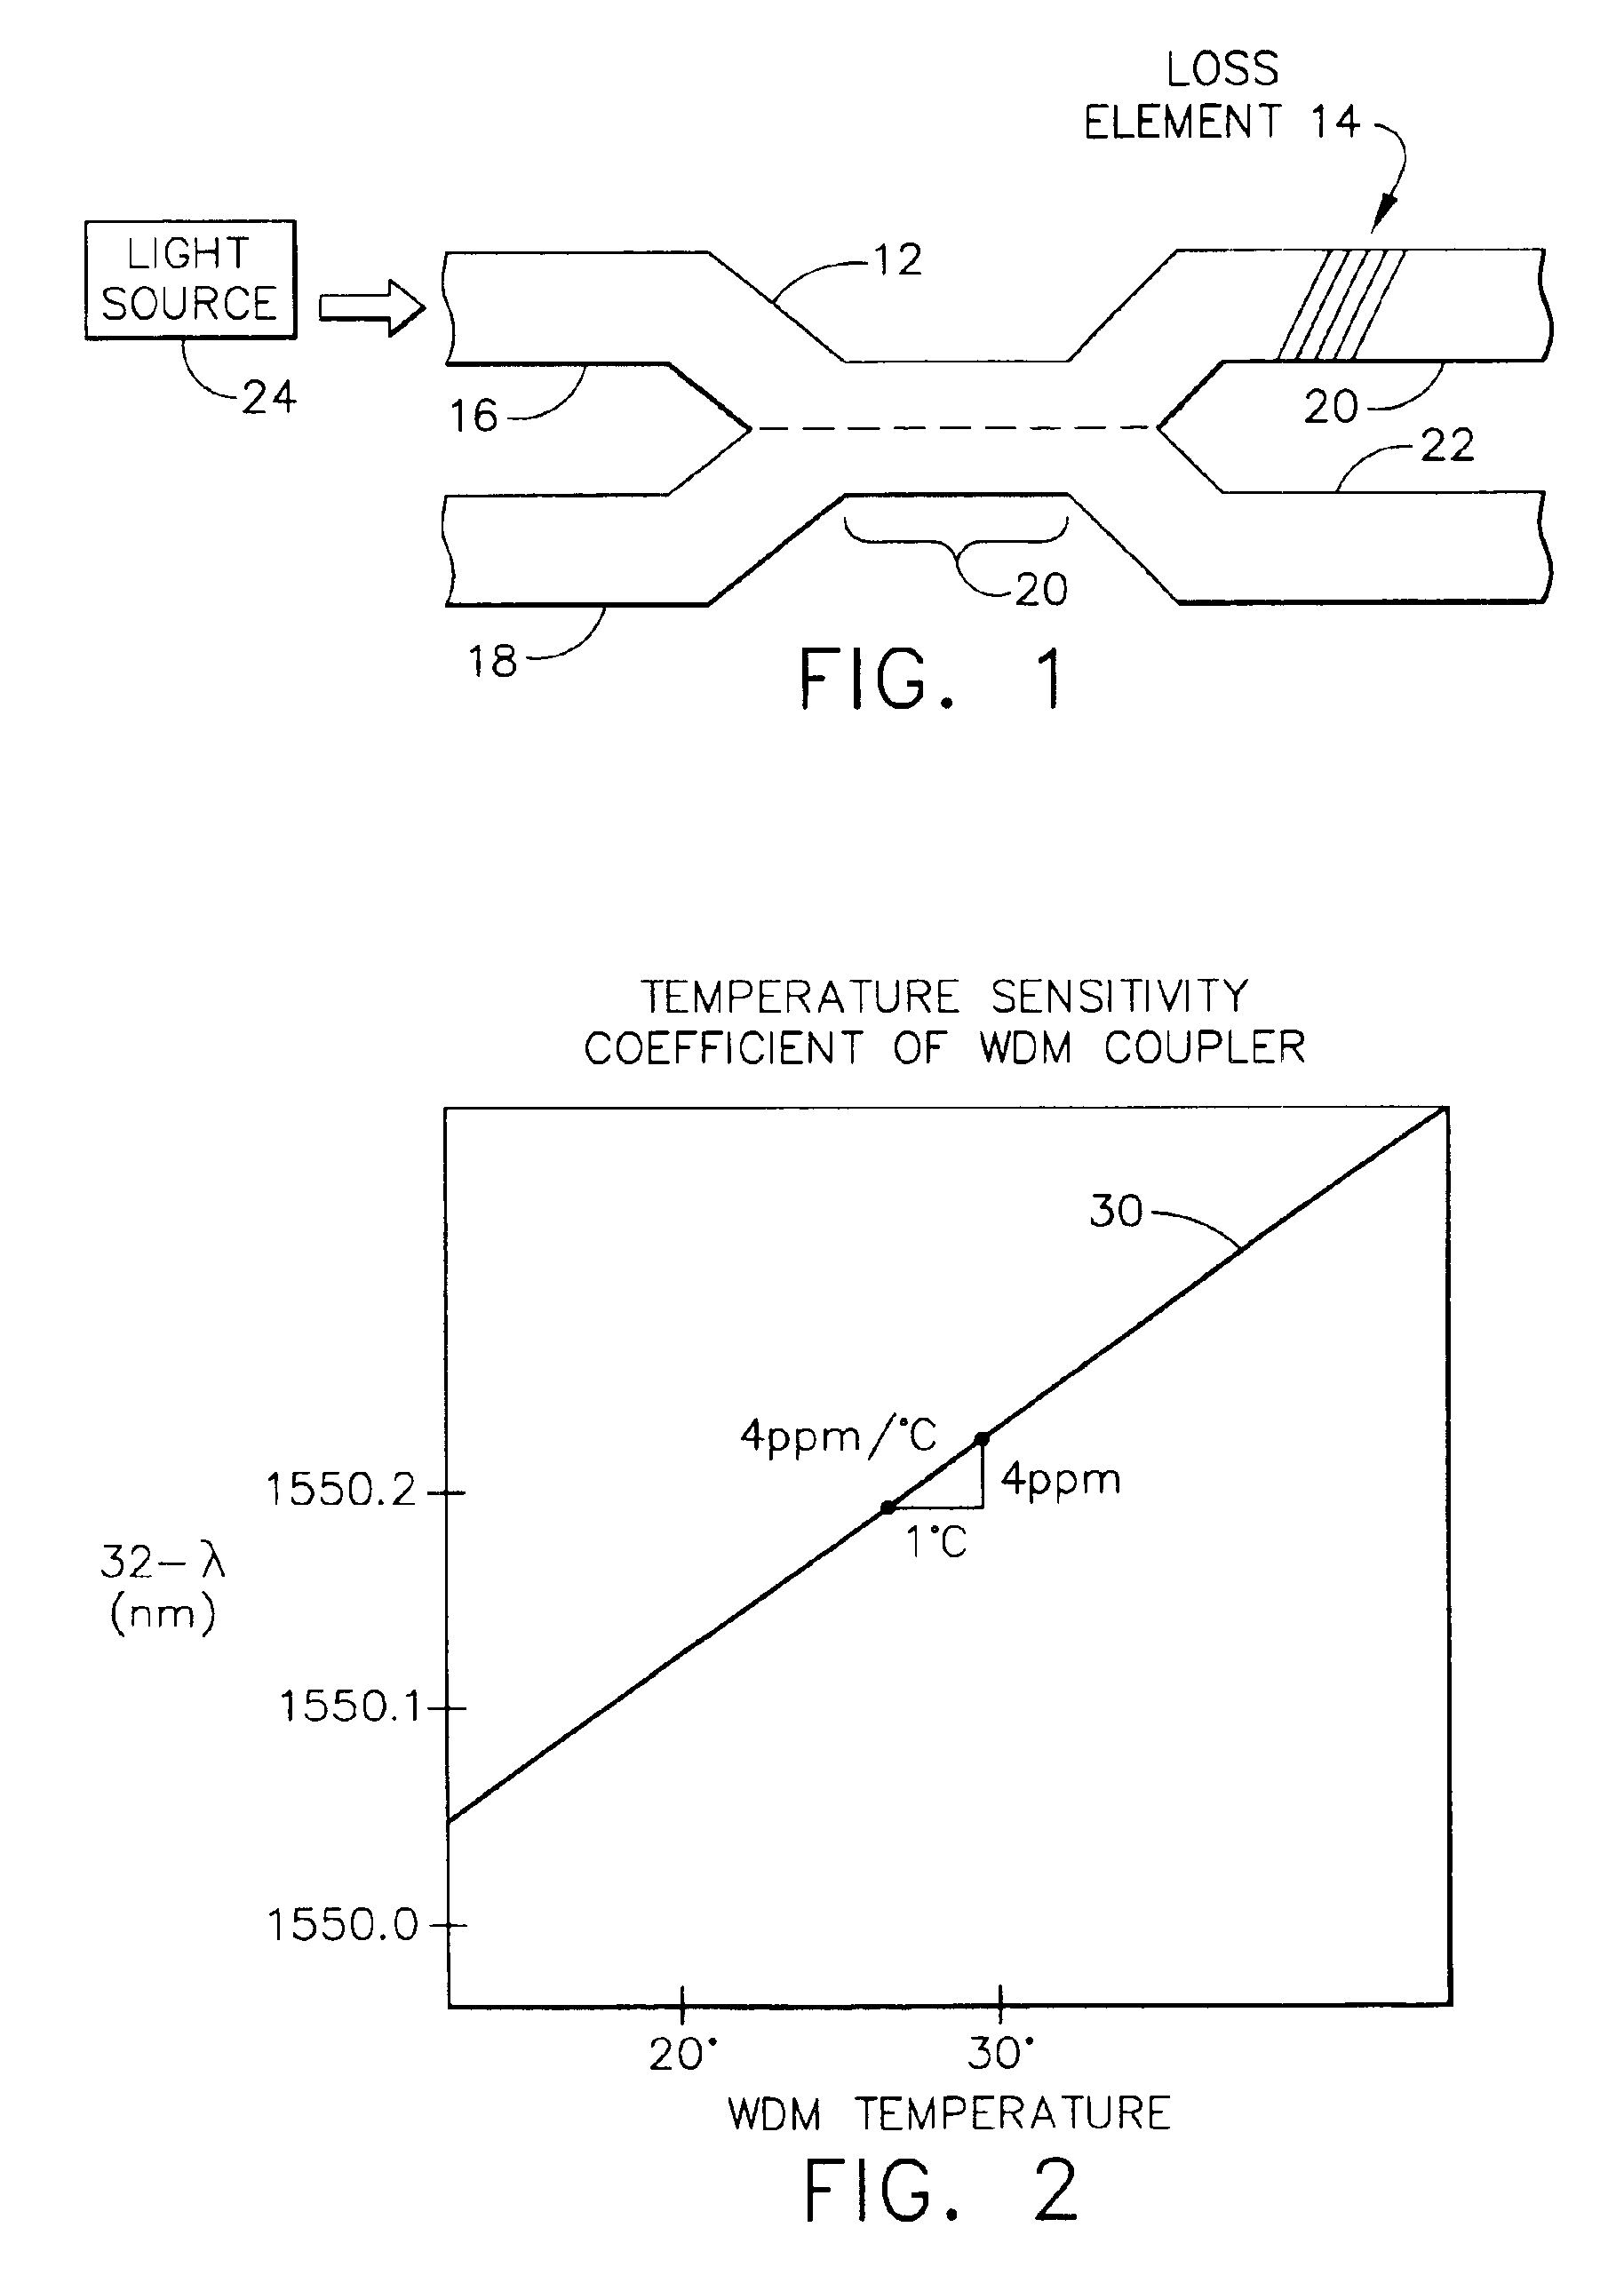 Wavelength division multiplexing coupler with loss element